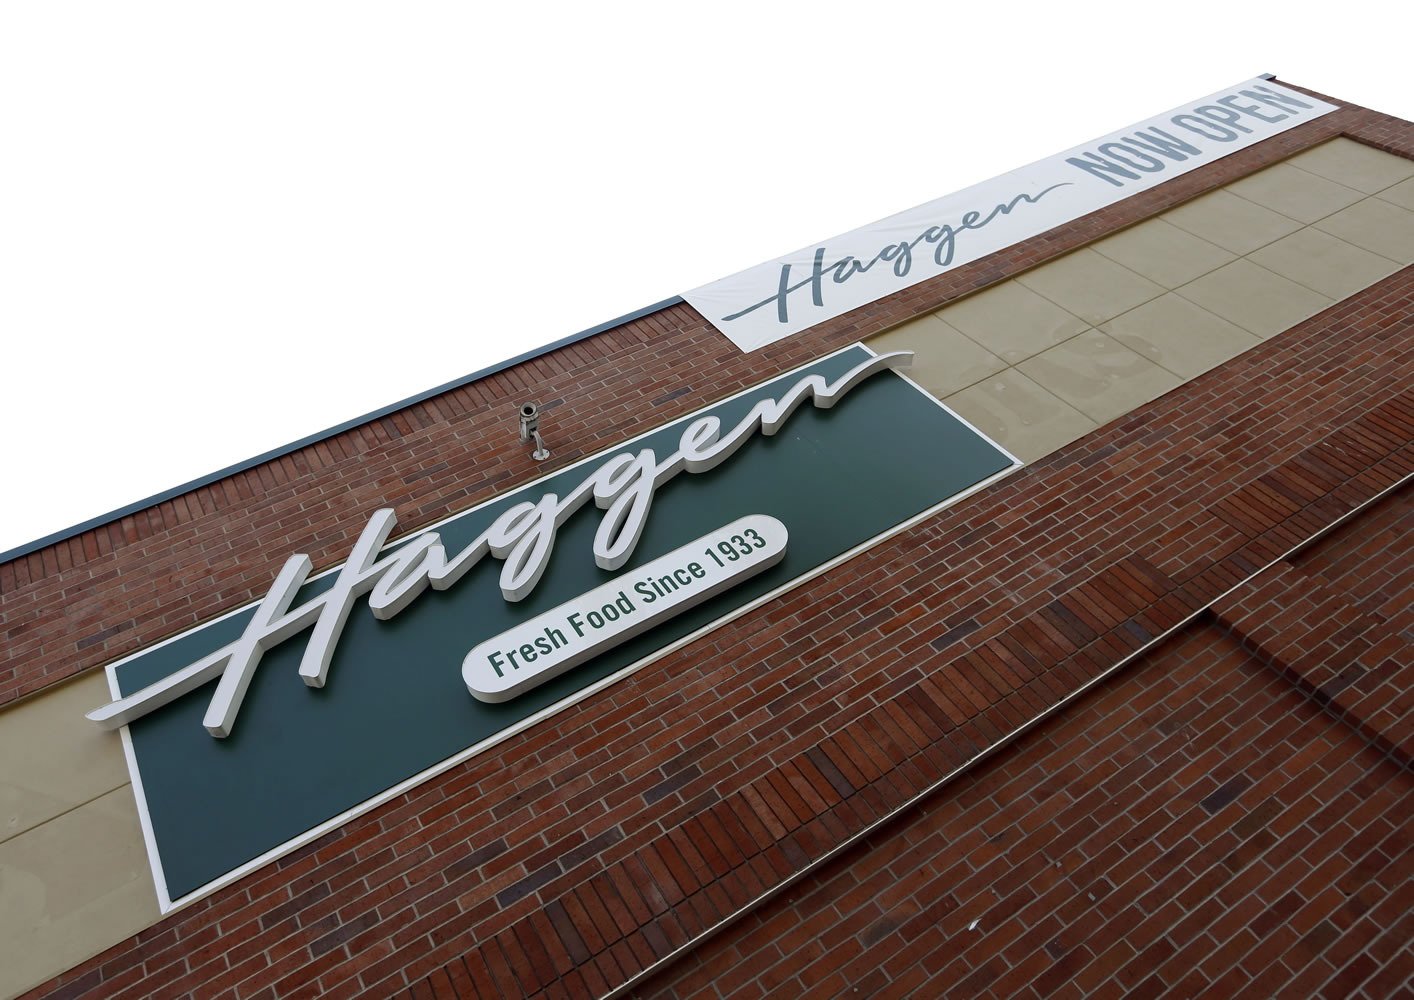 A Haggen grocery store in Tigard, Ore.